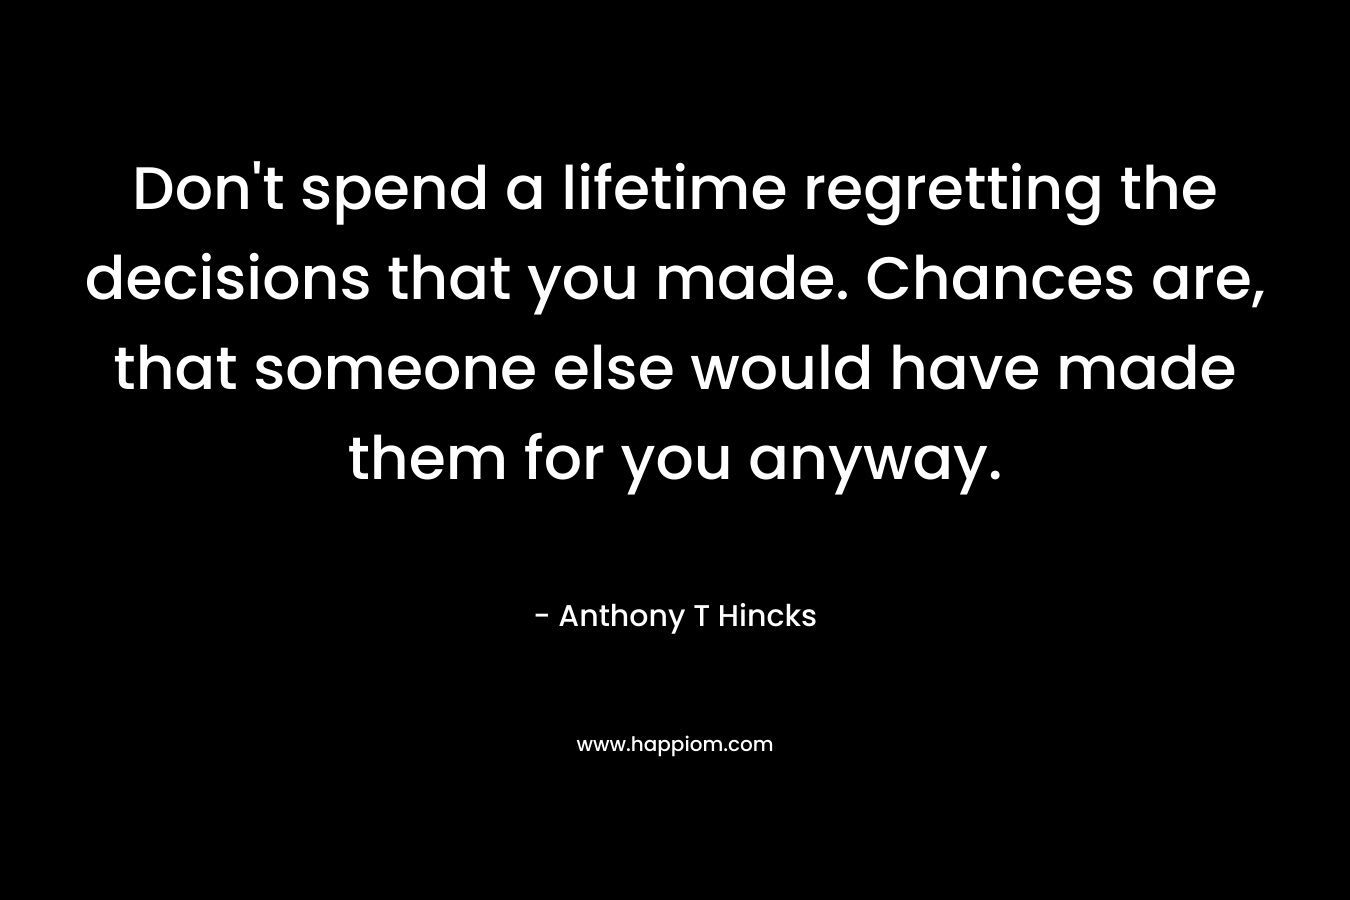 Don’t spend a lifetime regretting the decisions that you made. Chances are, that someone else would have made them for you anyway. – Anthony T Hincks